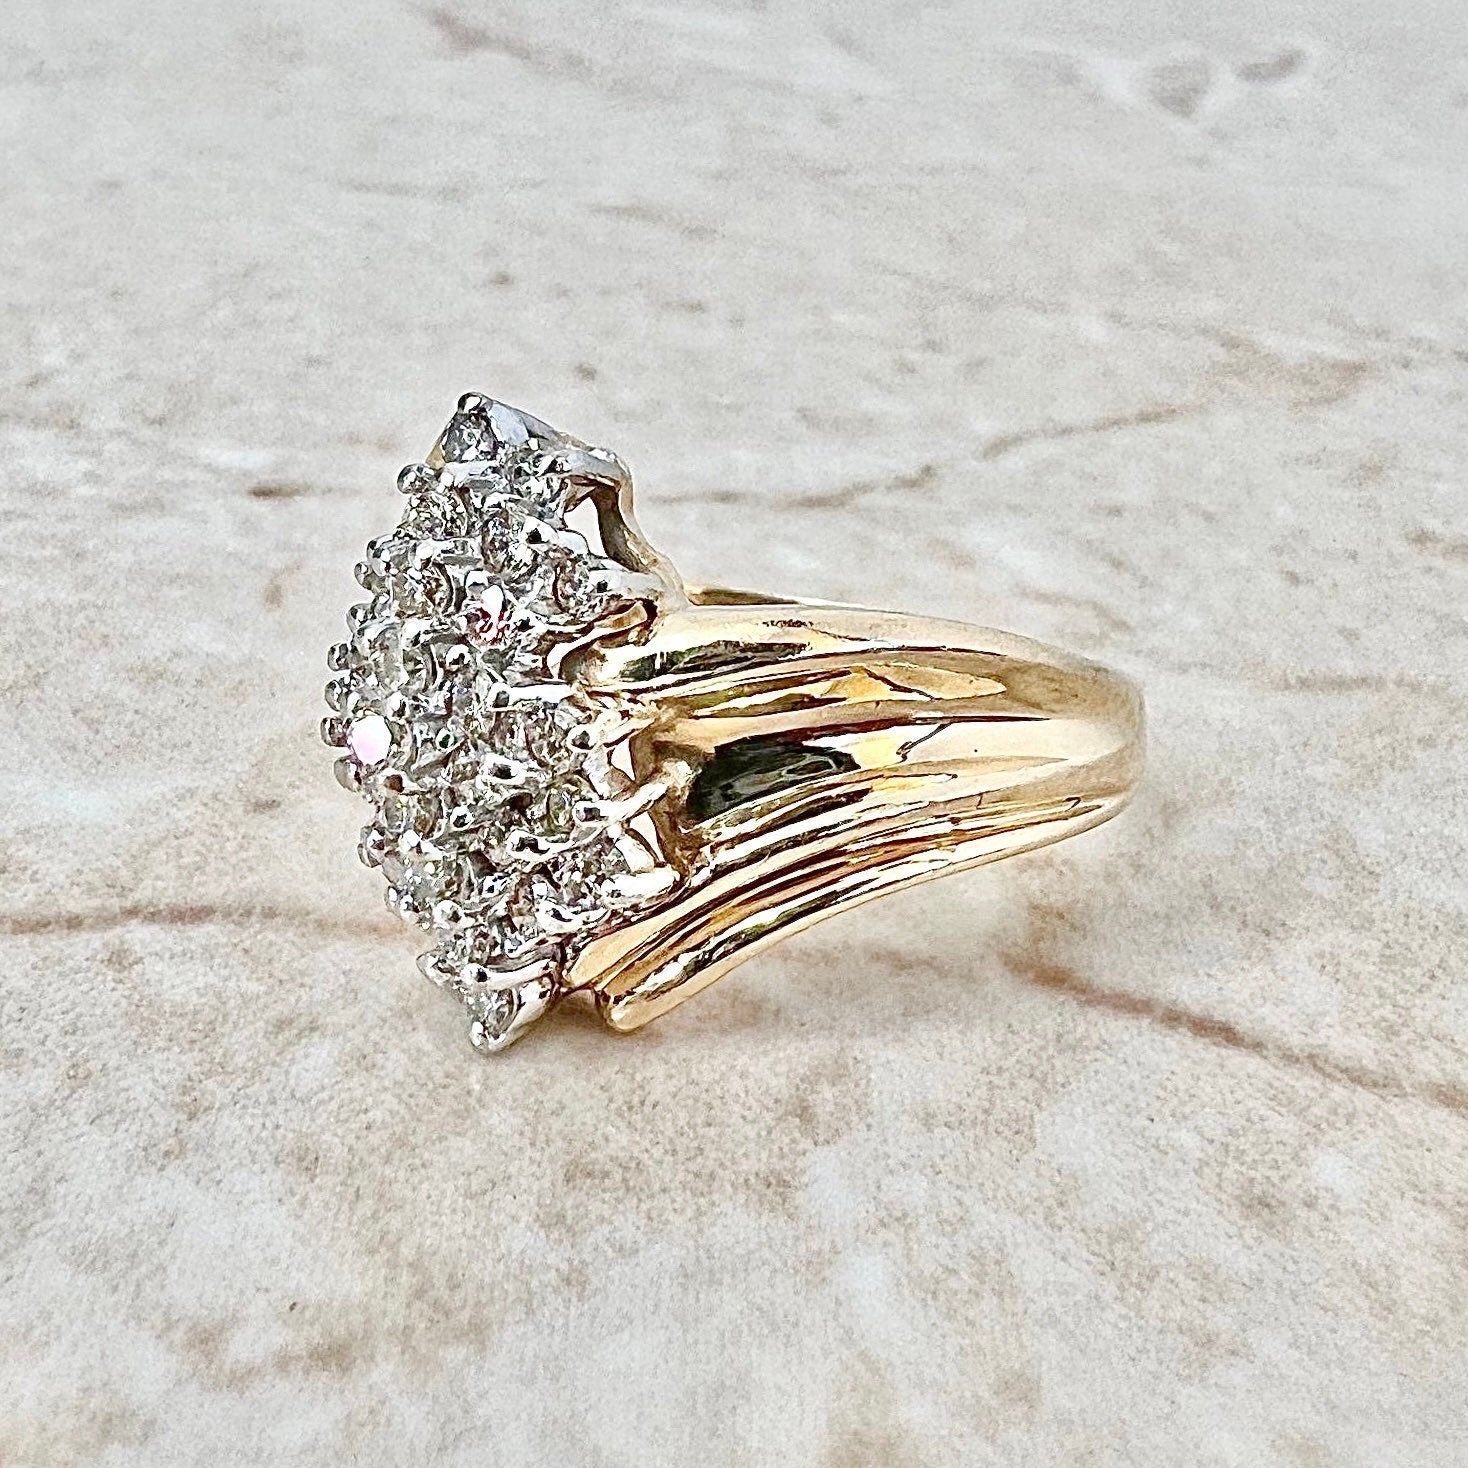 Vintage Diamond Cluster Ring - 14K Yellow Gold Diamond Cocktail Ring - Bypass Diamond Ring - 14K Gold Ring -Statement Ring-Anniversary Gifts